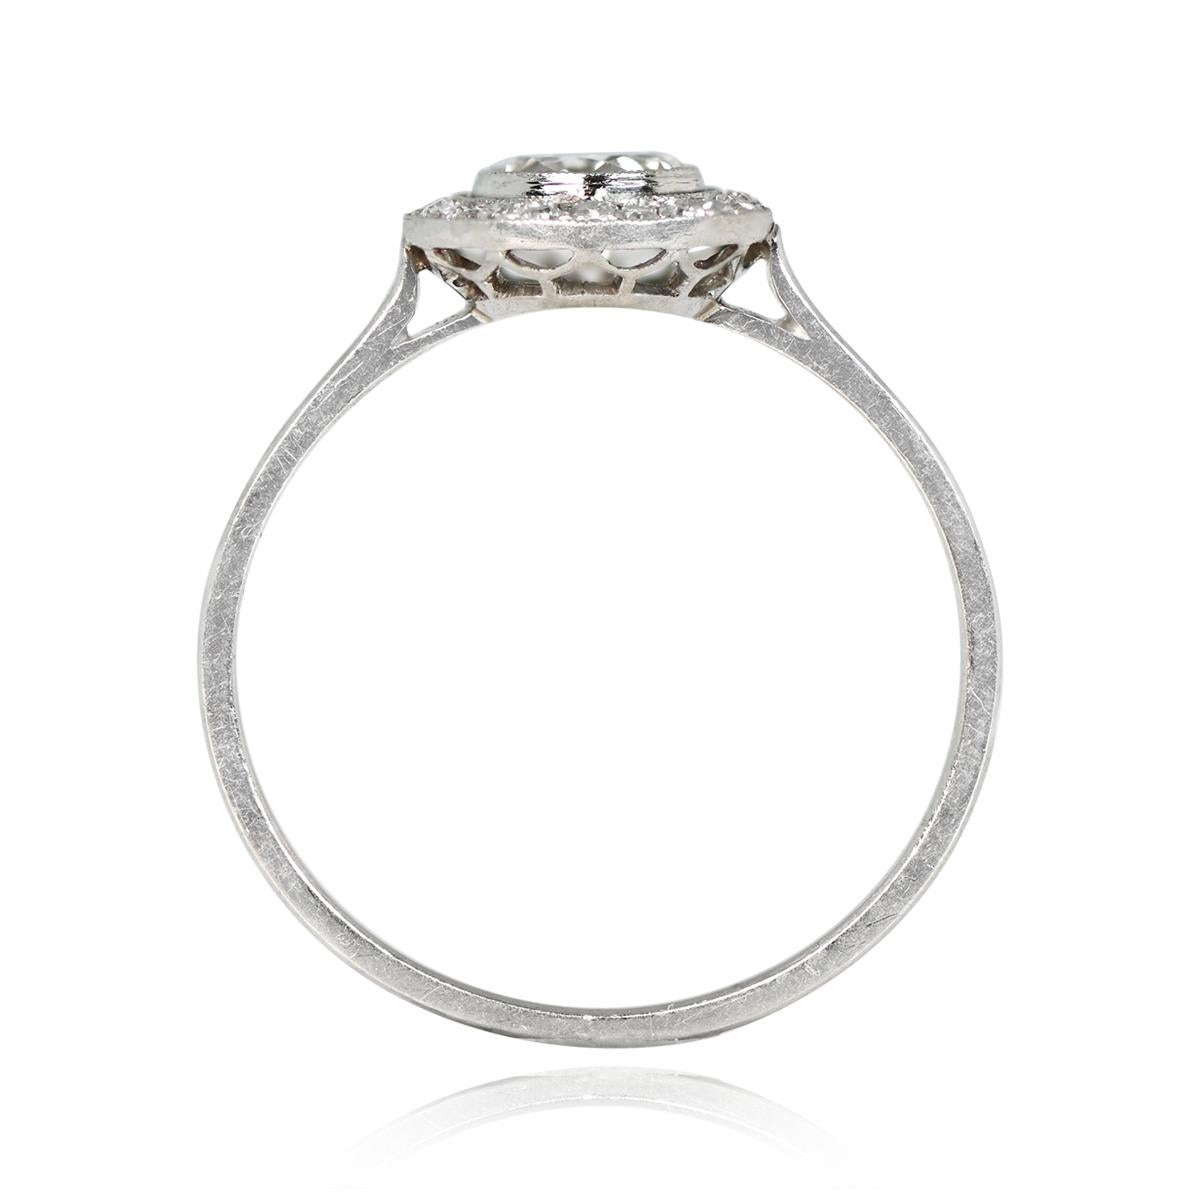 An engagement ring showcasing an elegant round cut diamond, expertly bezel-set, and accompanied by a stunning halo of single-cut diamonds. The center diamond boasts a weight of 0.25 carats, emanating a radiant sparkle. Its L color and I2 clarity